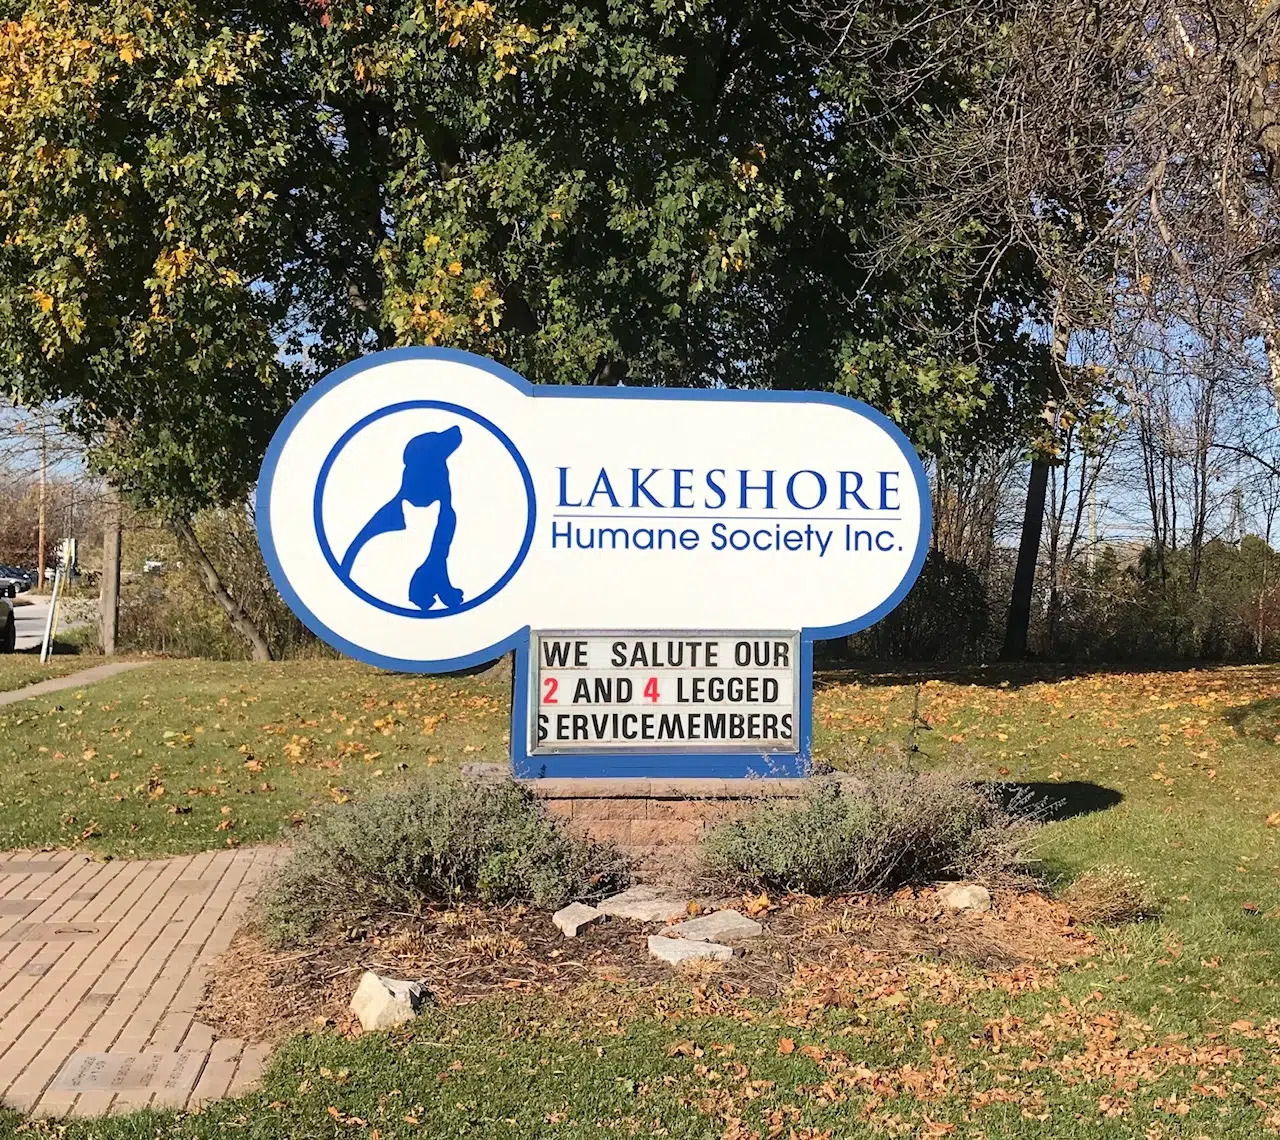 Lakeshore Humane Society Building Shows Age and Space Needs